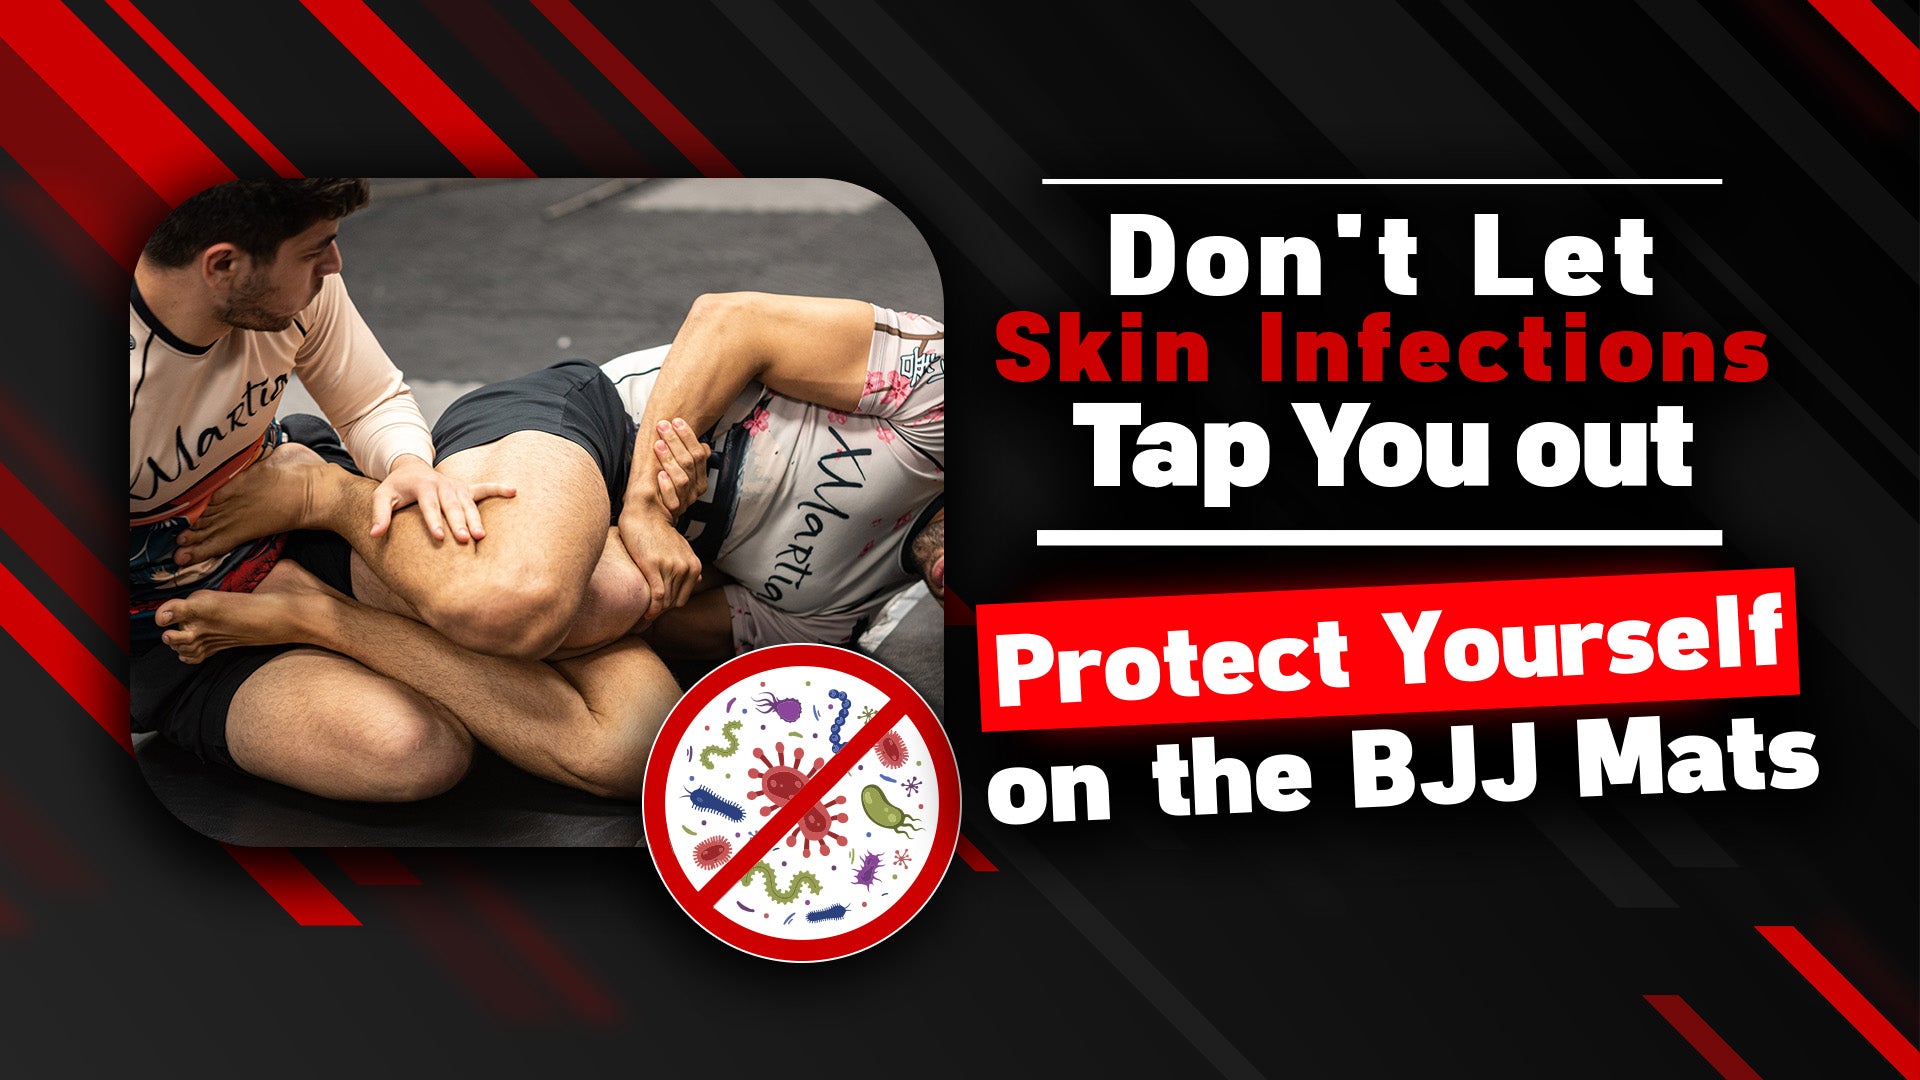 Don't Let BJJ Skin Infections Tap You Out: Protect Yourself on the Mats